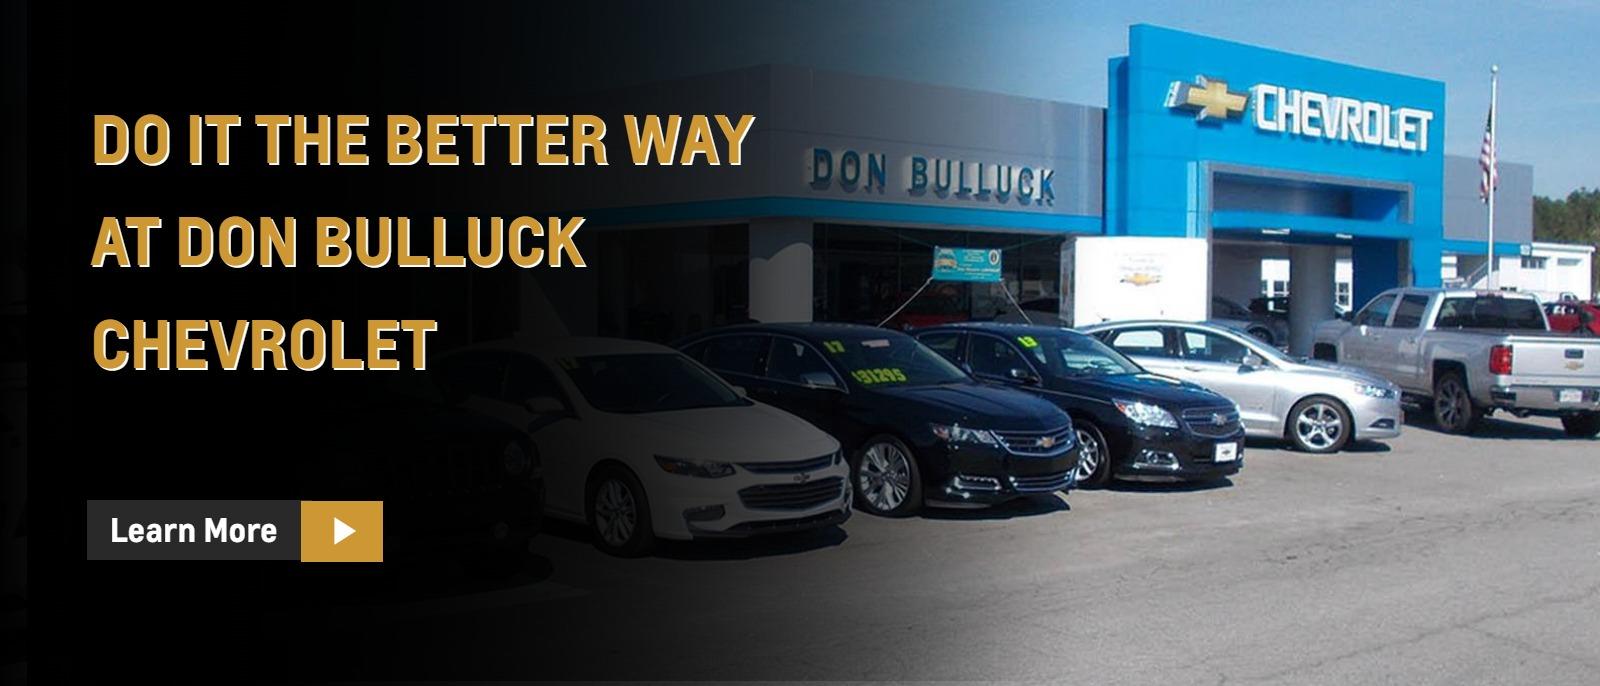 Do It the Better Way at Don Bulluck Chevrolet